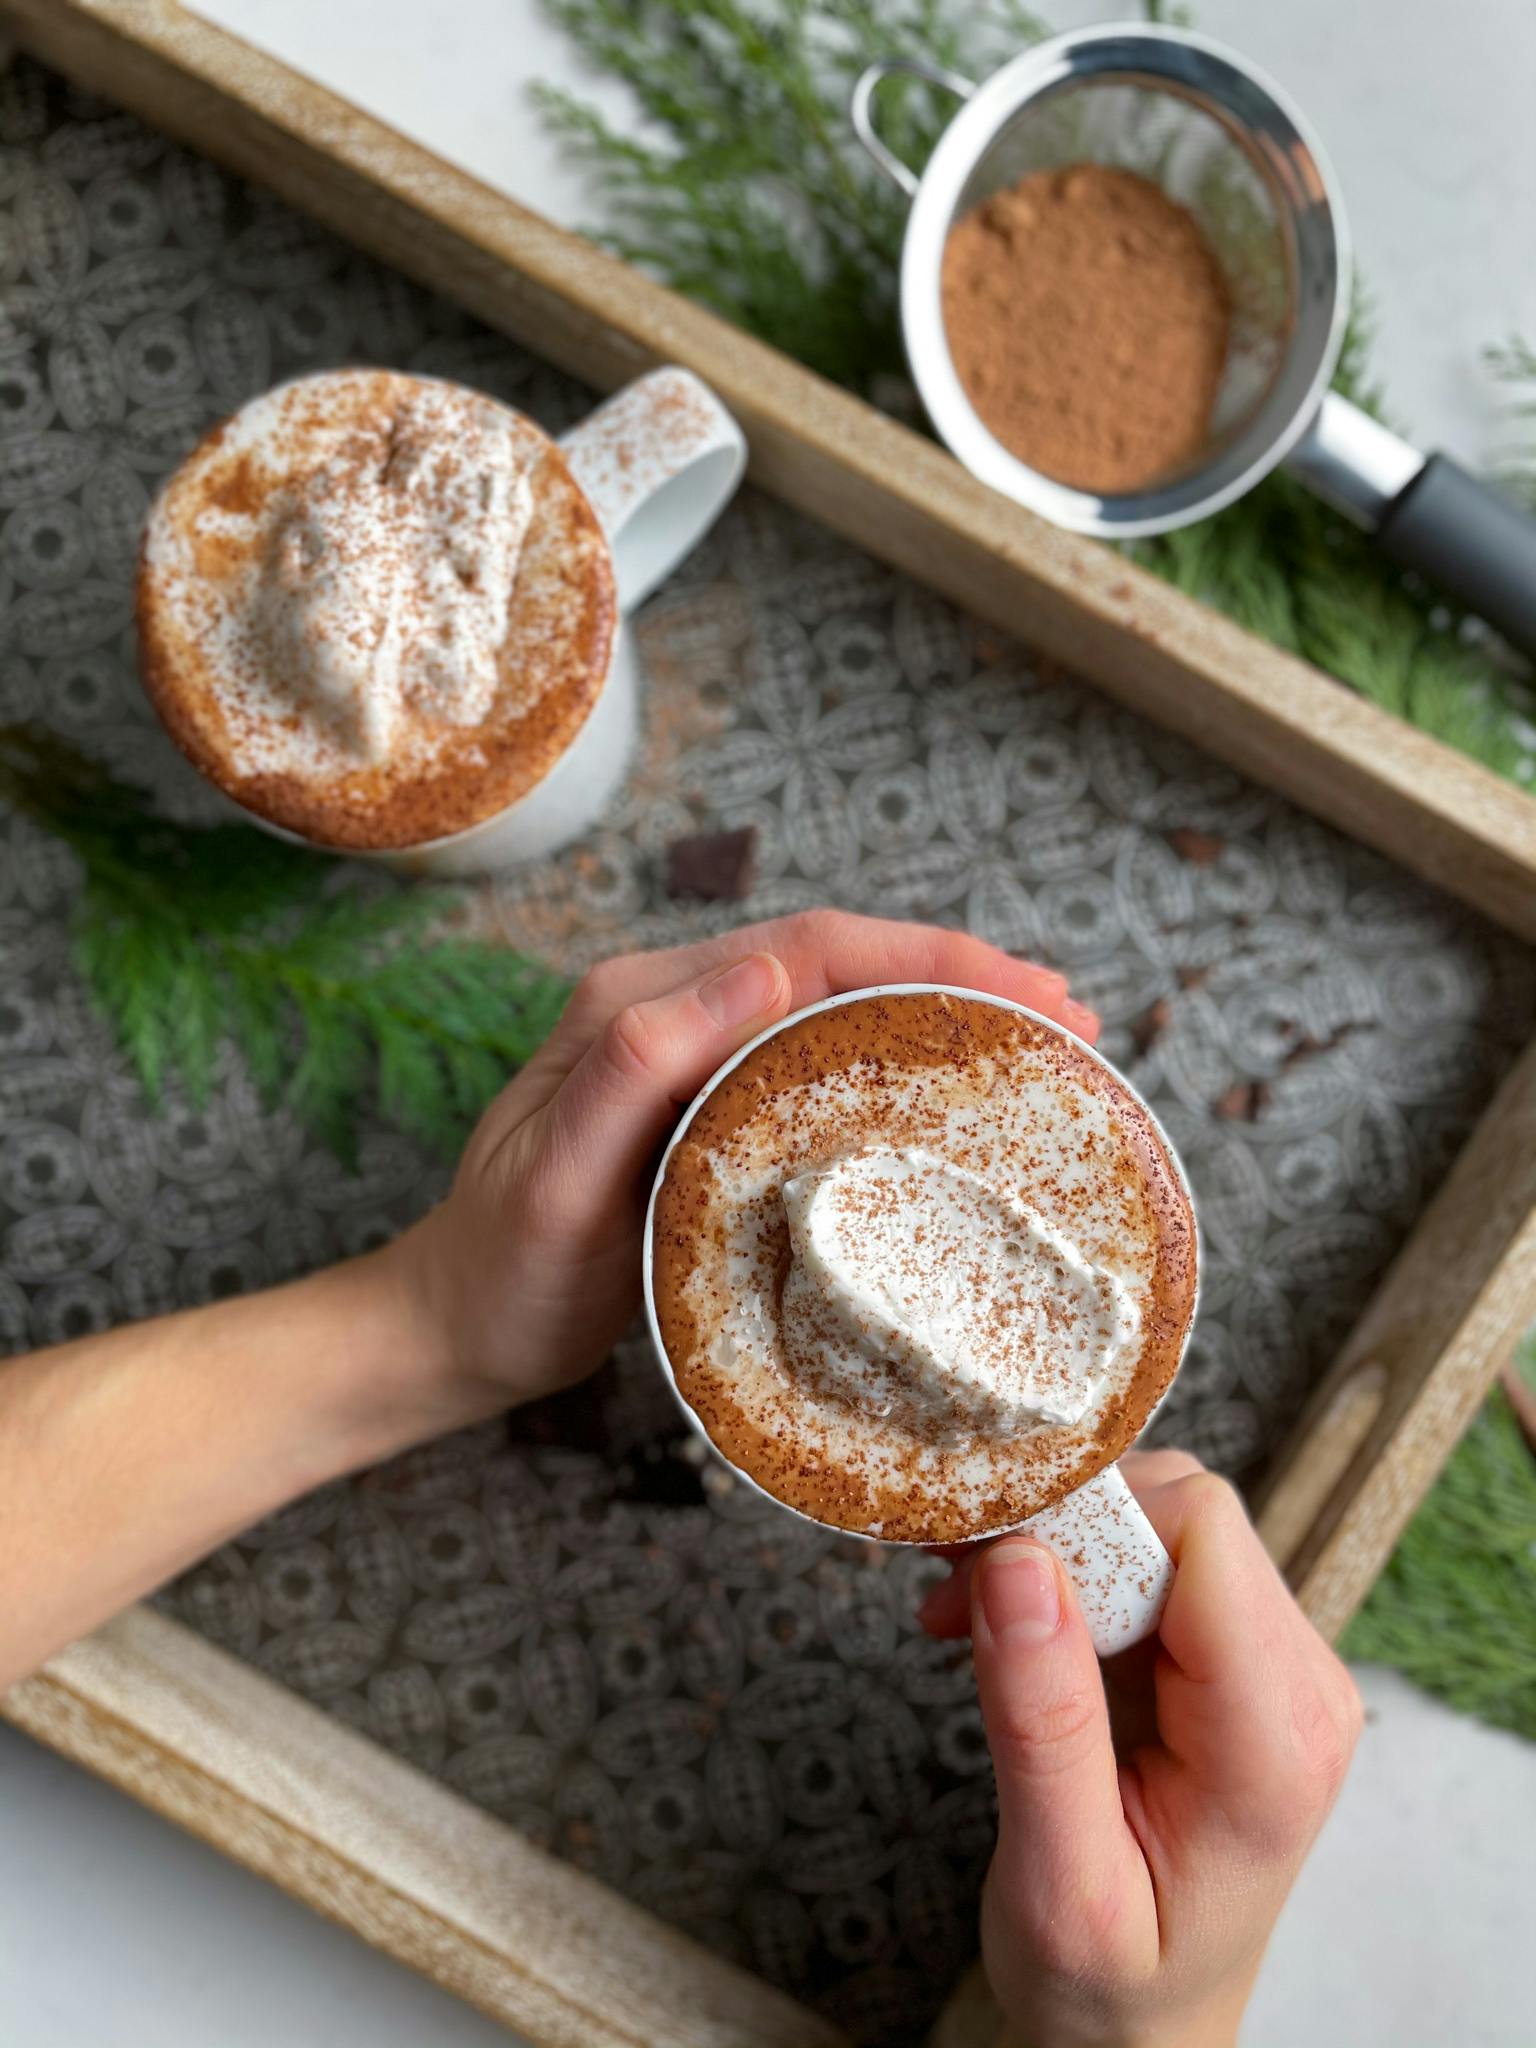 Hands holding a mug of healthy hot chocolate.